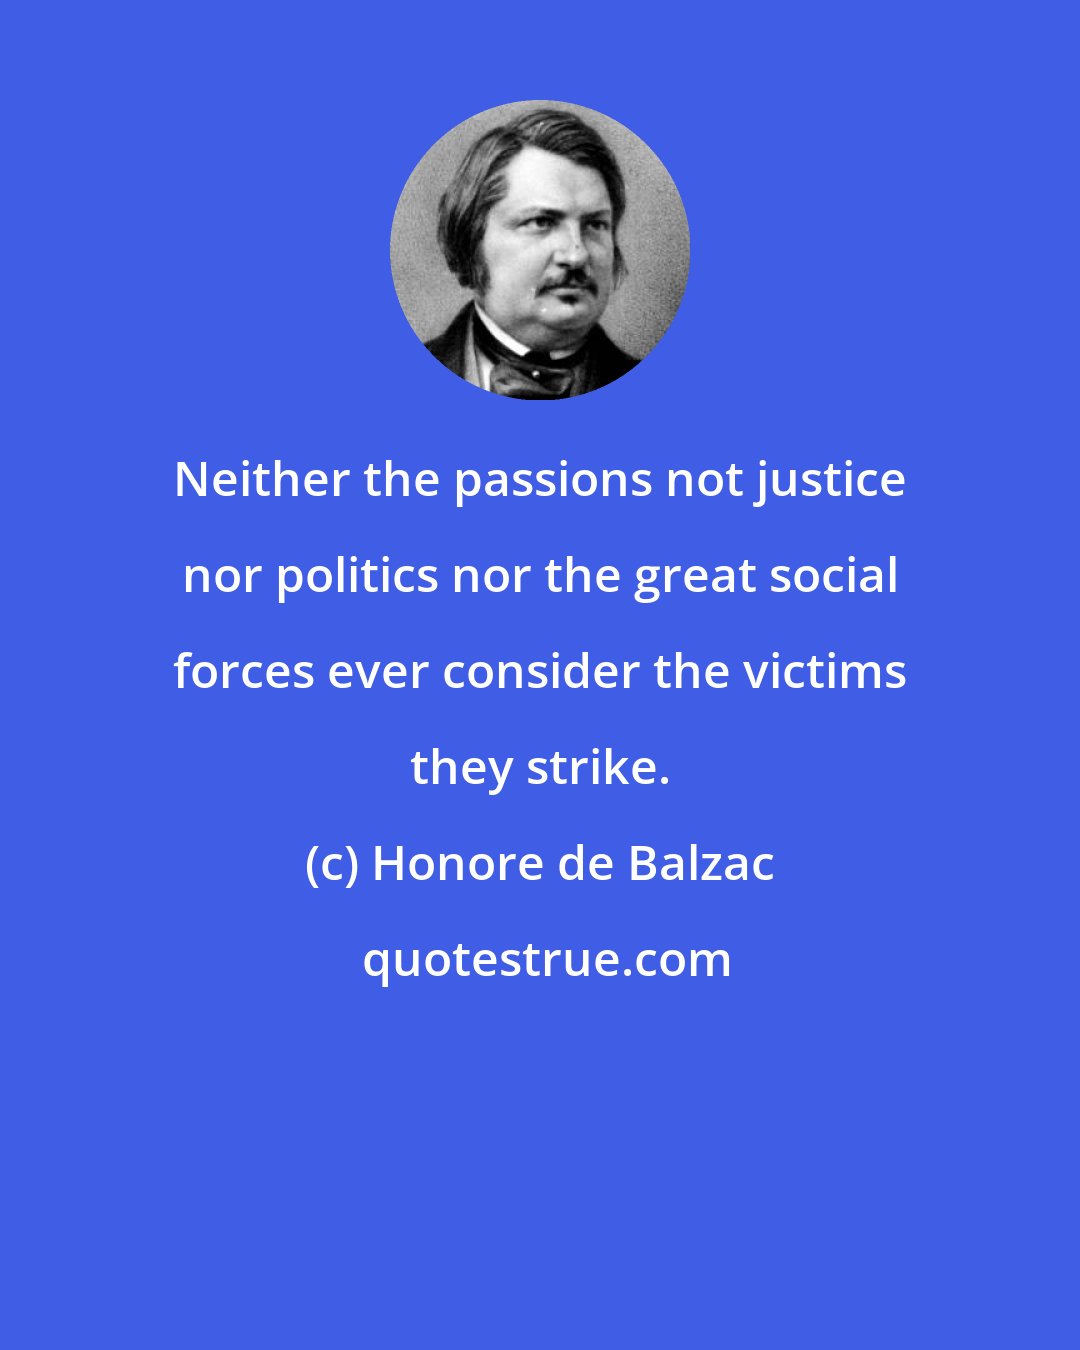 Honore de Balzac: Neither the passions not justice nor politics nor the great social forces ever consider the victims they strike.